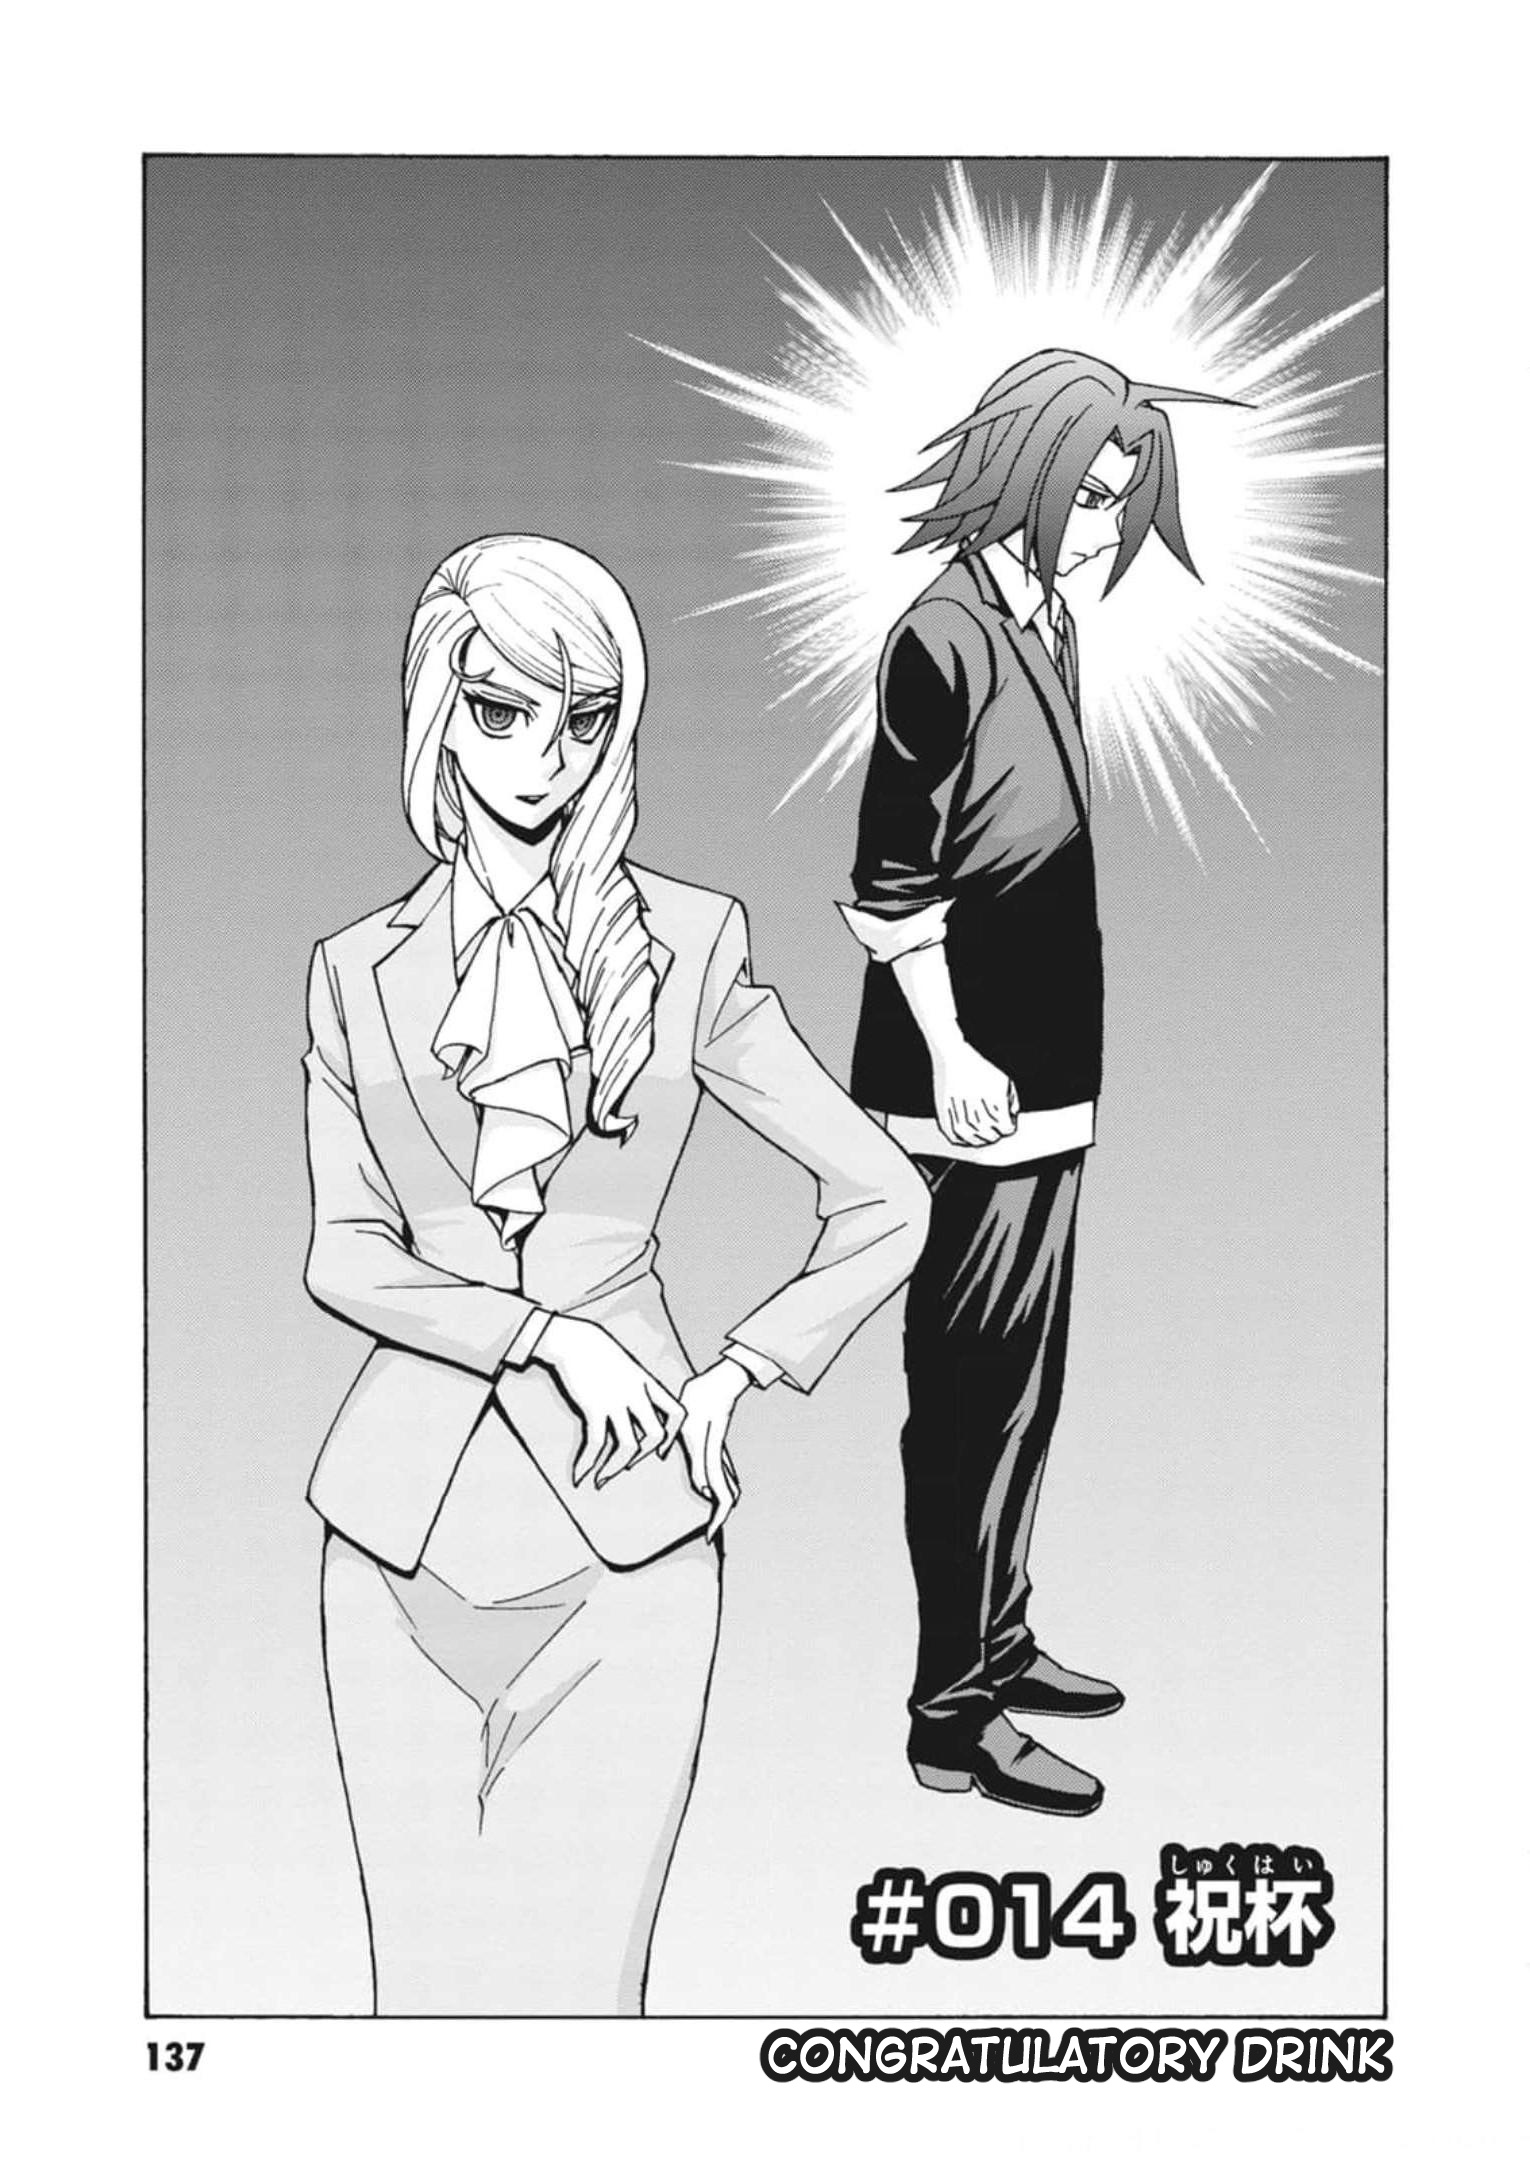 Cardfight!! Vanguard: Turnabout Vol.2 Chapter 14: Congratulatory Drink - Picture 1